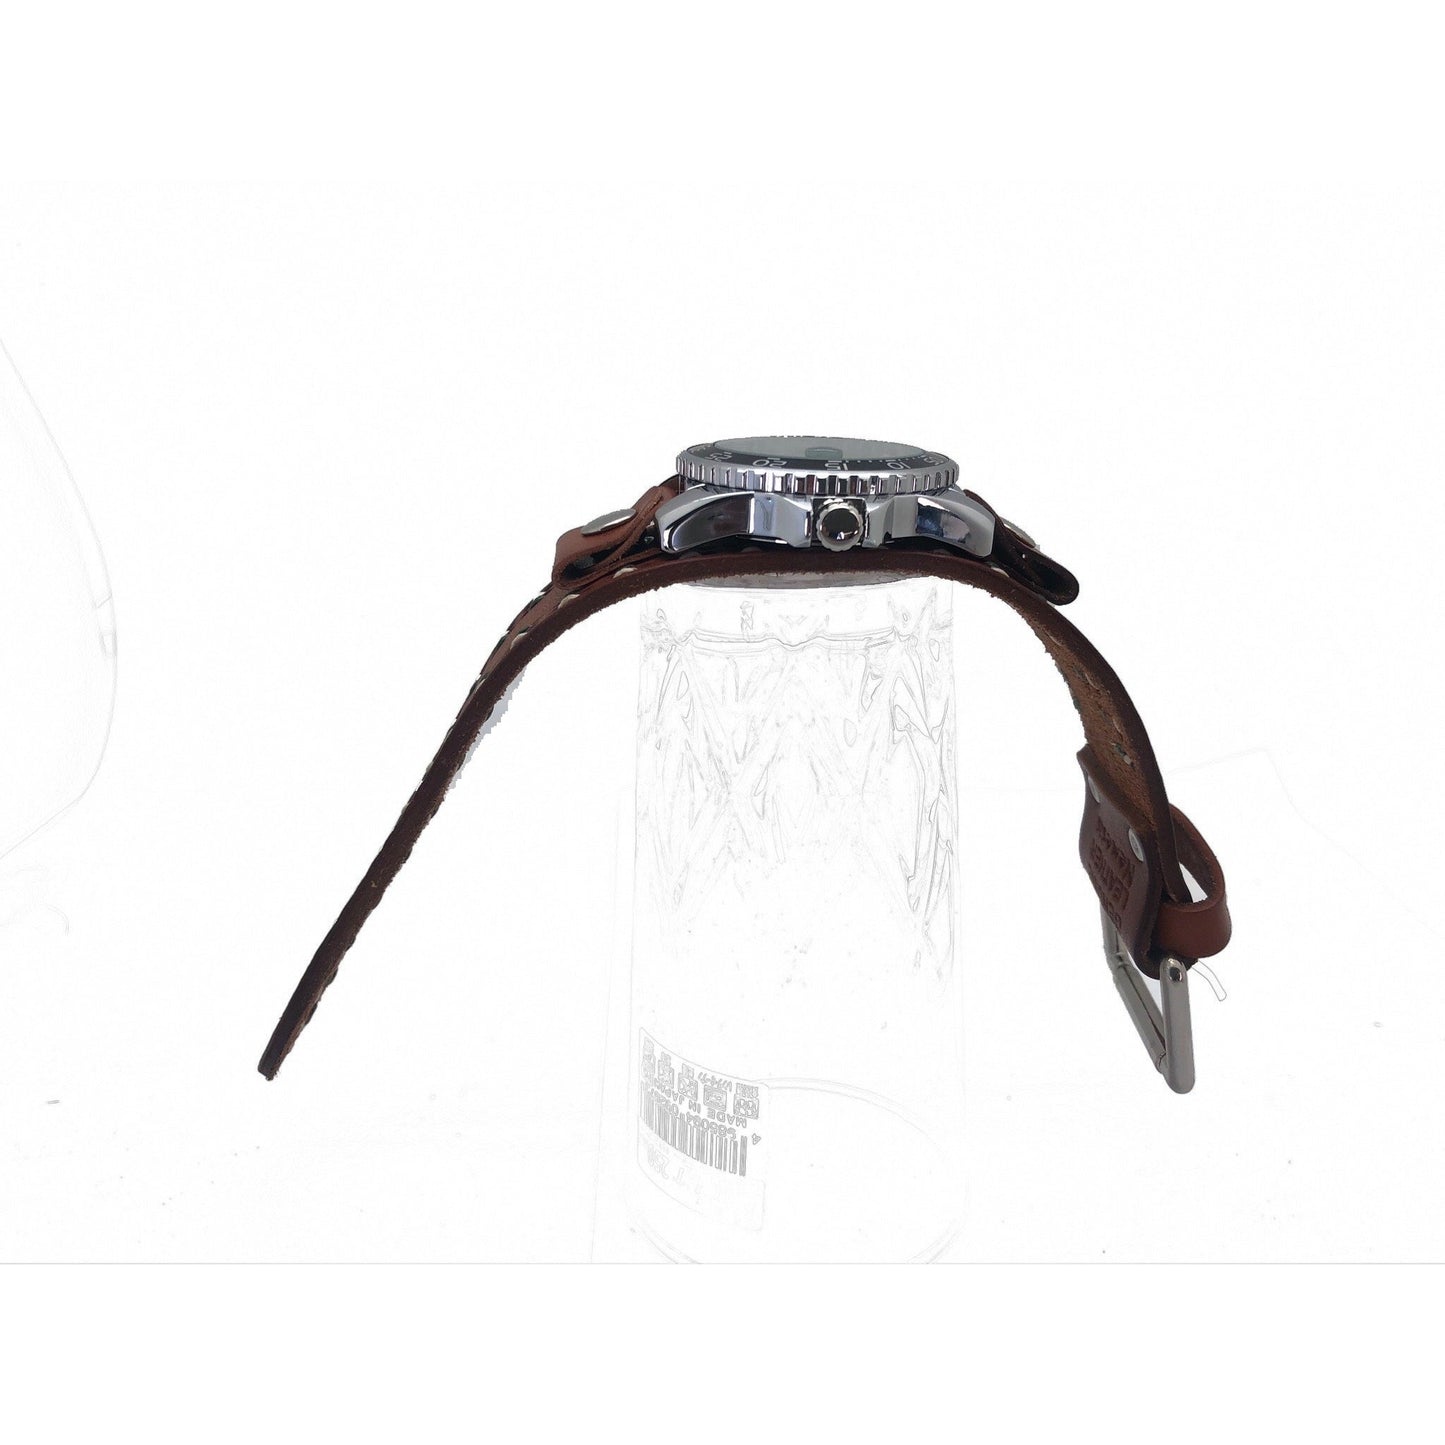 Moonwalker Luminous Blue Diver with White Stitched Brown Leather Cuff